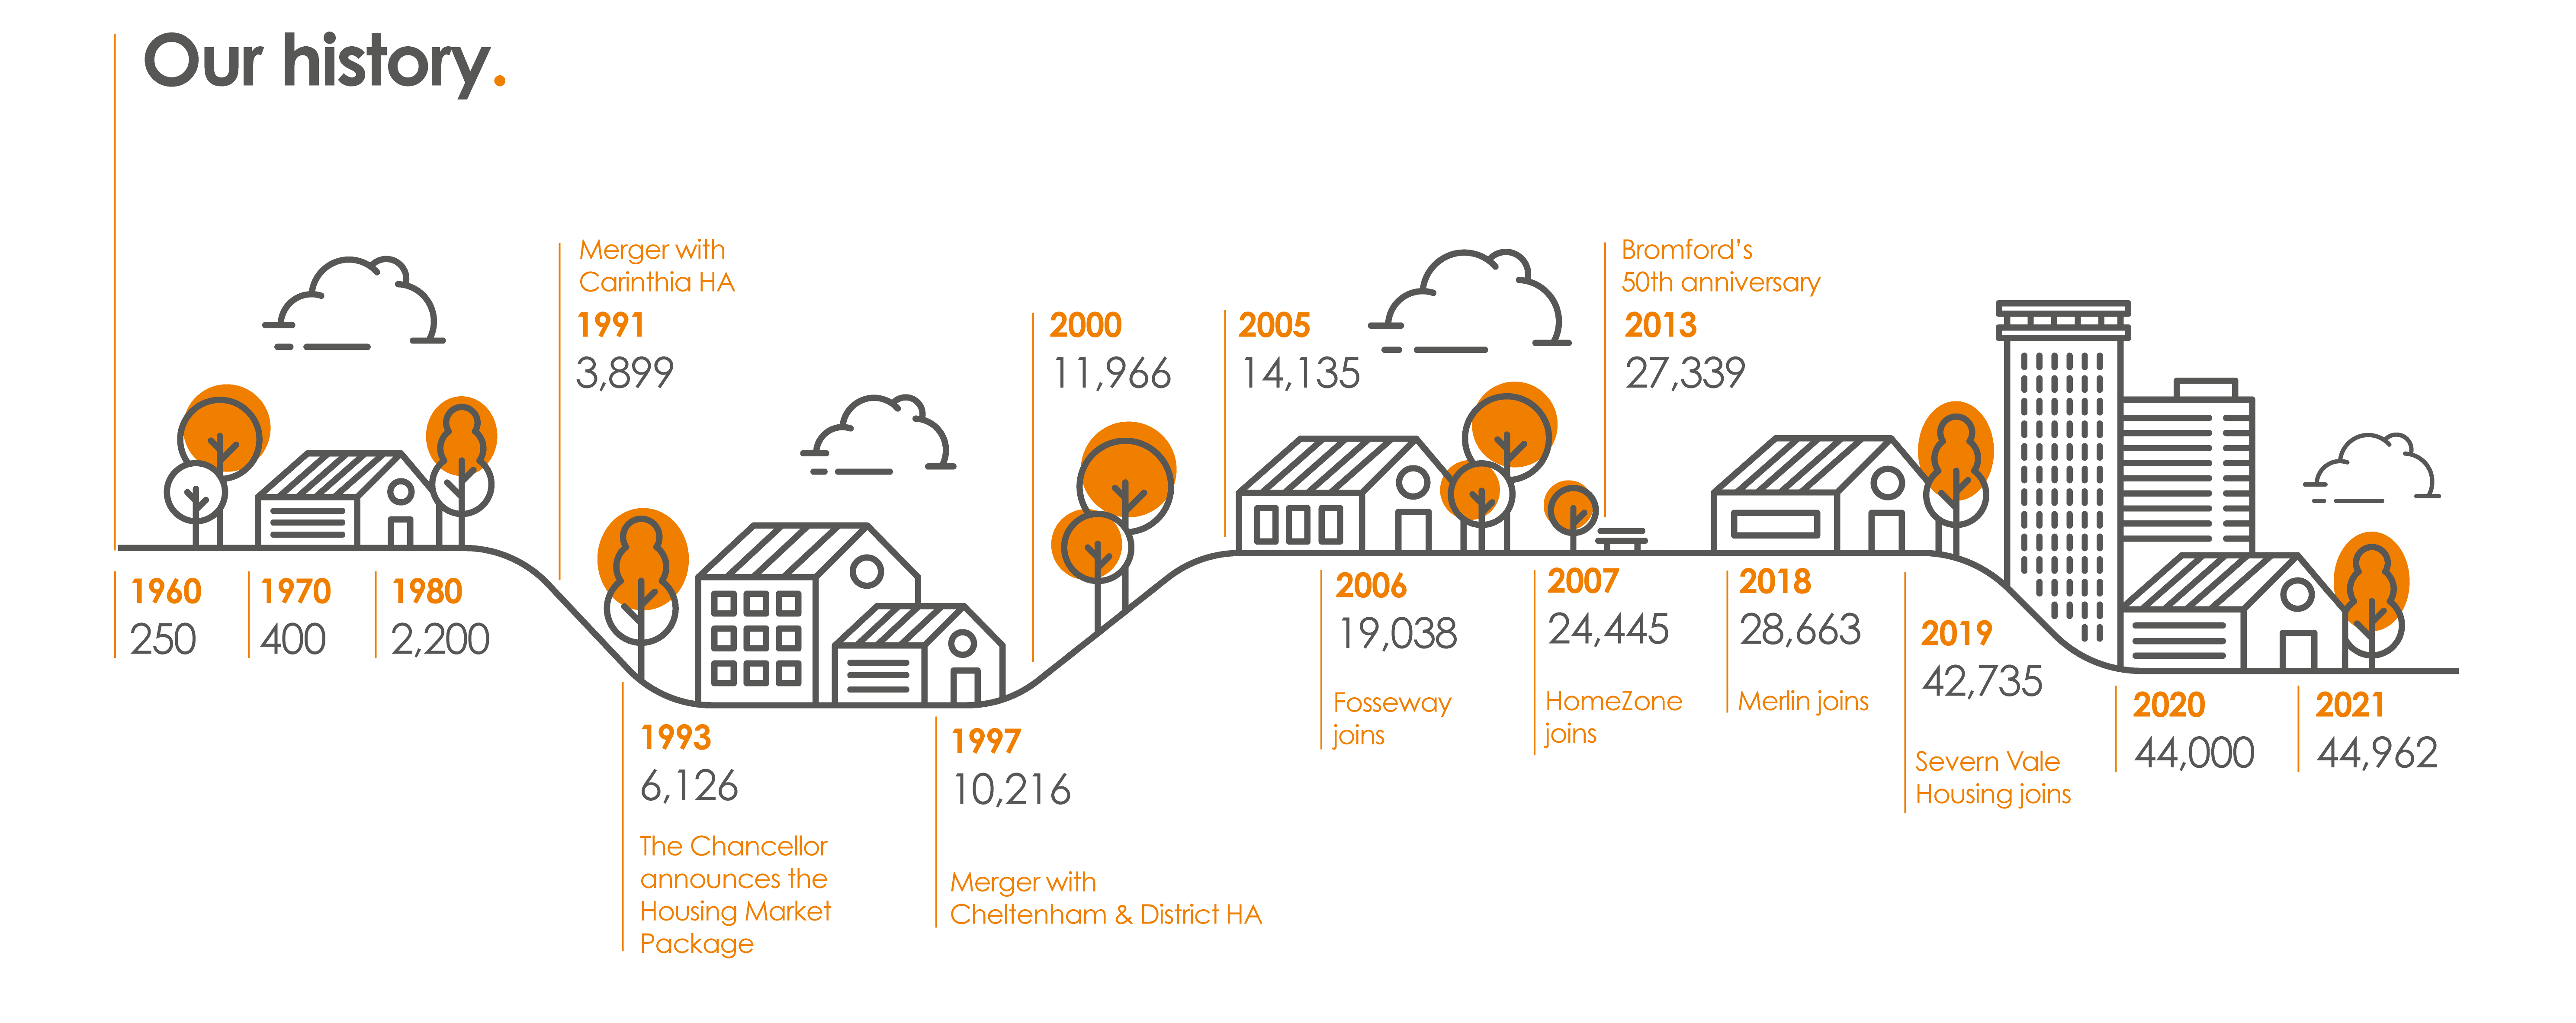 Infographic representing a timeline of Bromford property numbers starting from 1960s where Bromford owned 250 homes to 2021 where we owned 44'962.